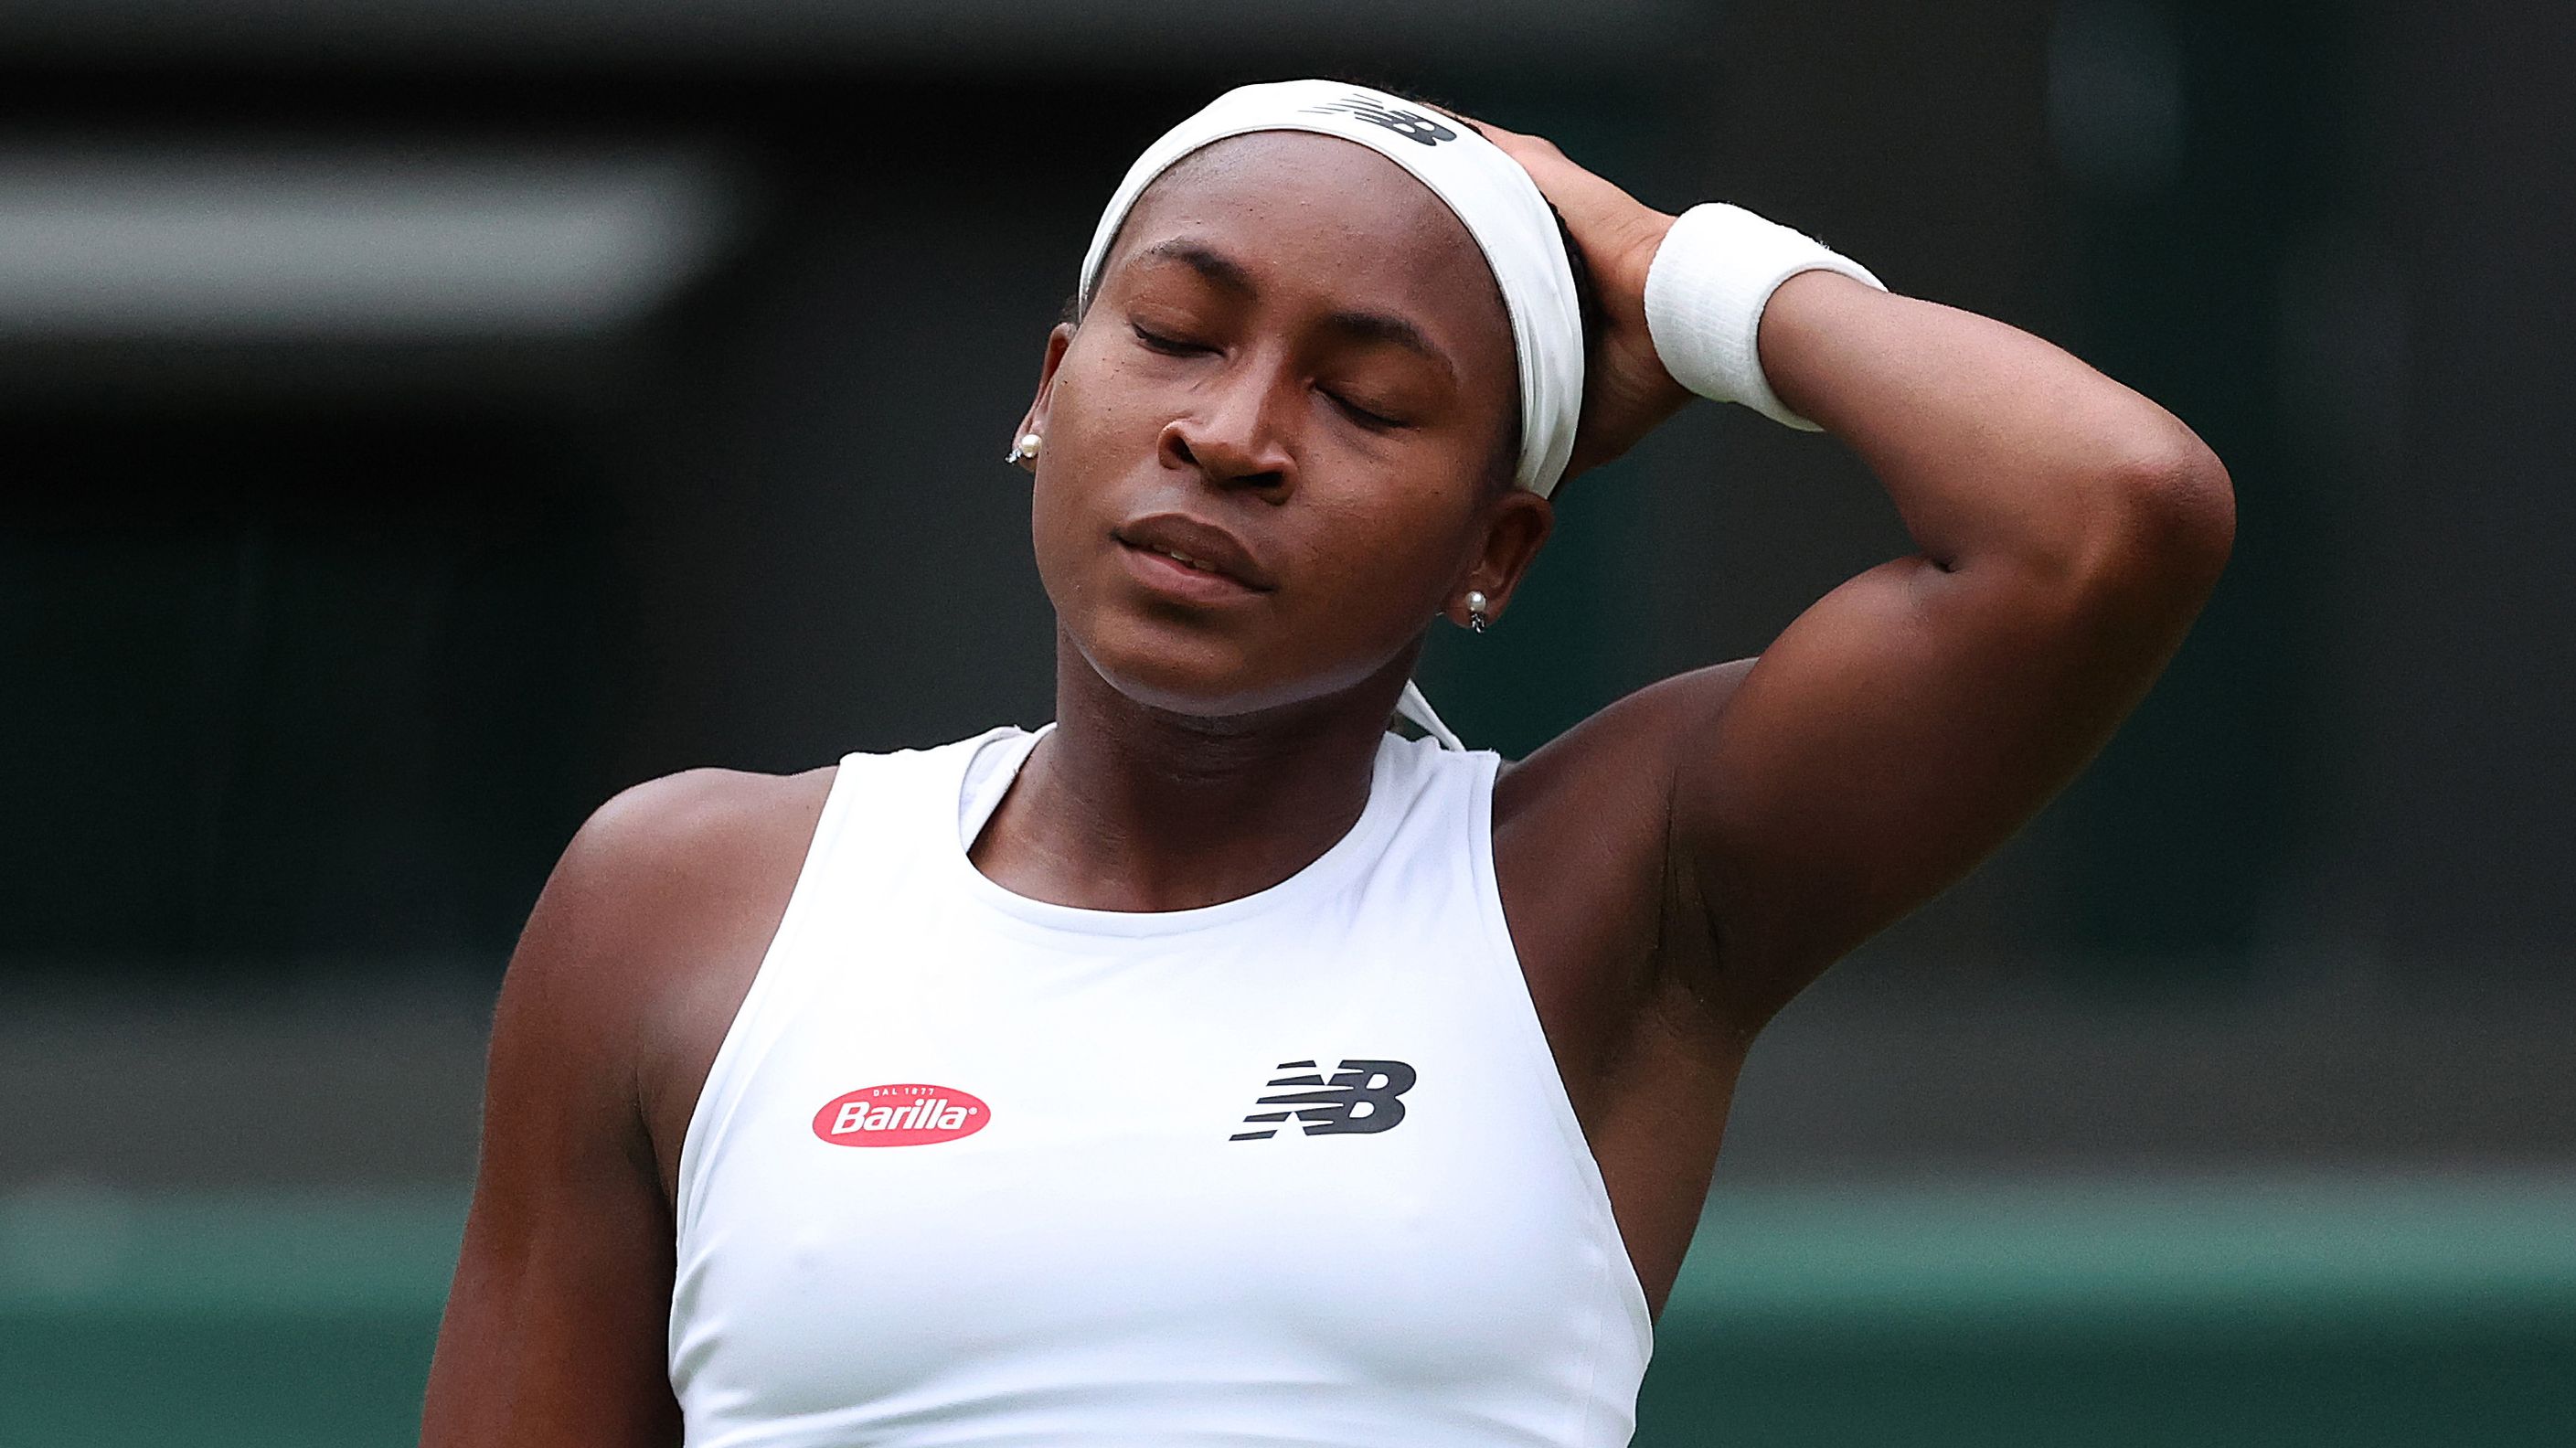 Coco Gauff was bundled out of the first round at Wimbledon by 2020 Australian Open winner Sofia Kenin.